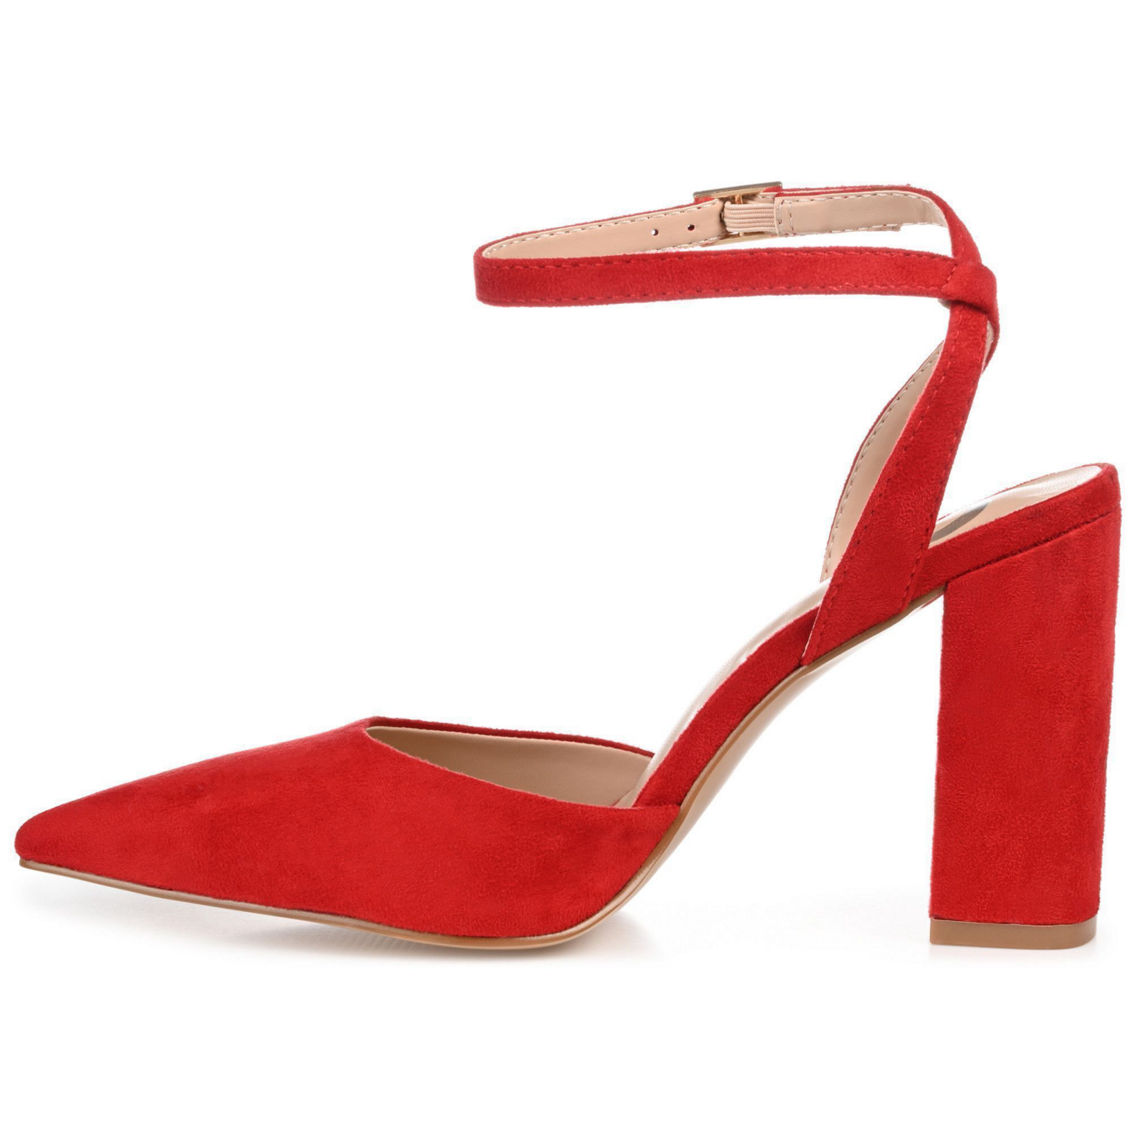 Journee Collection Women's Tyyra Pump - Image 4 of 5